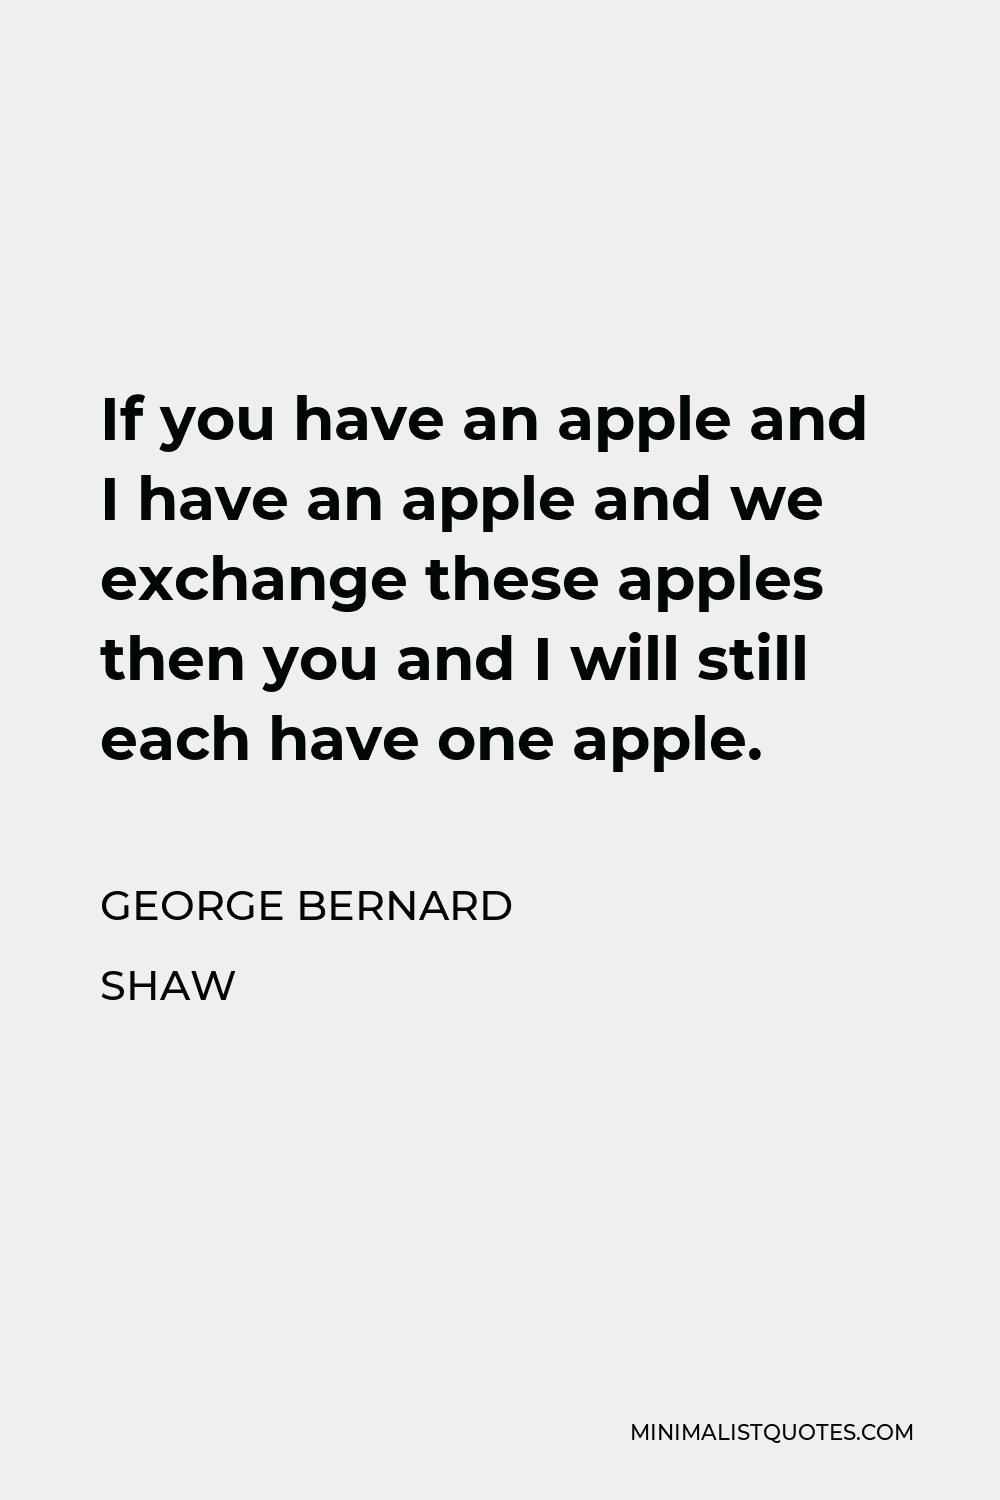 George Bernard Shaw Quote - If you have an apple and I have an apple and we exchange these apples then you and I will still each have one apple.